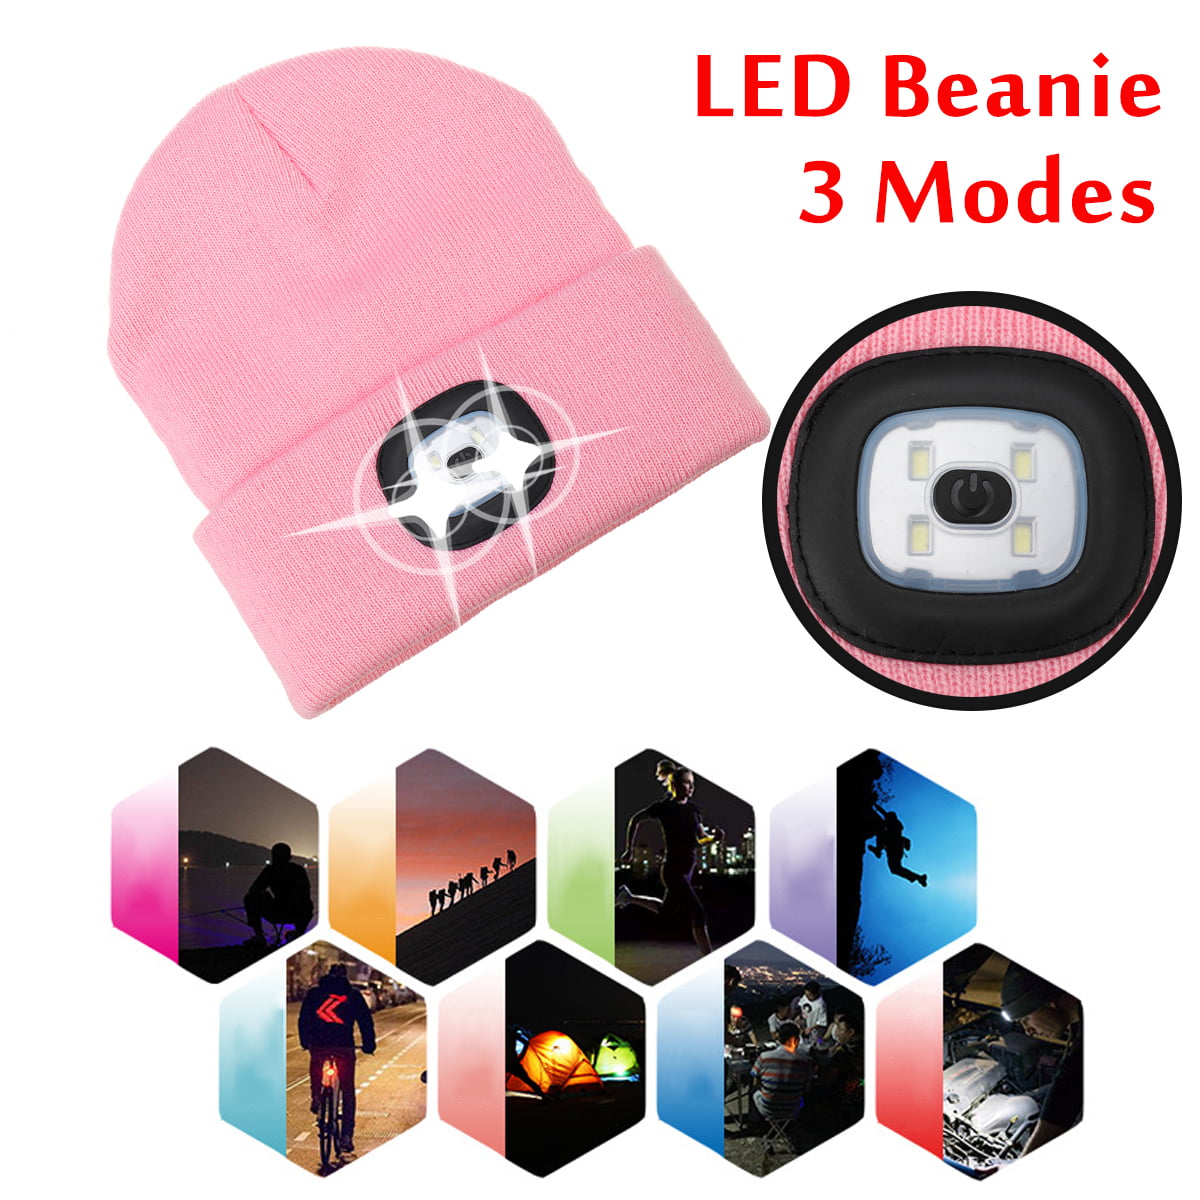 LED Beanie Hat With USB Rechargeable Battery Unisex High Powered Head Lamp Light 